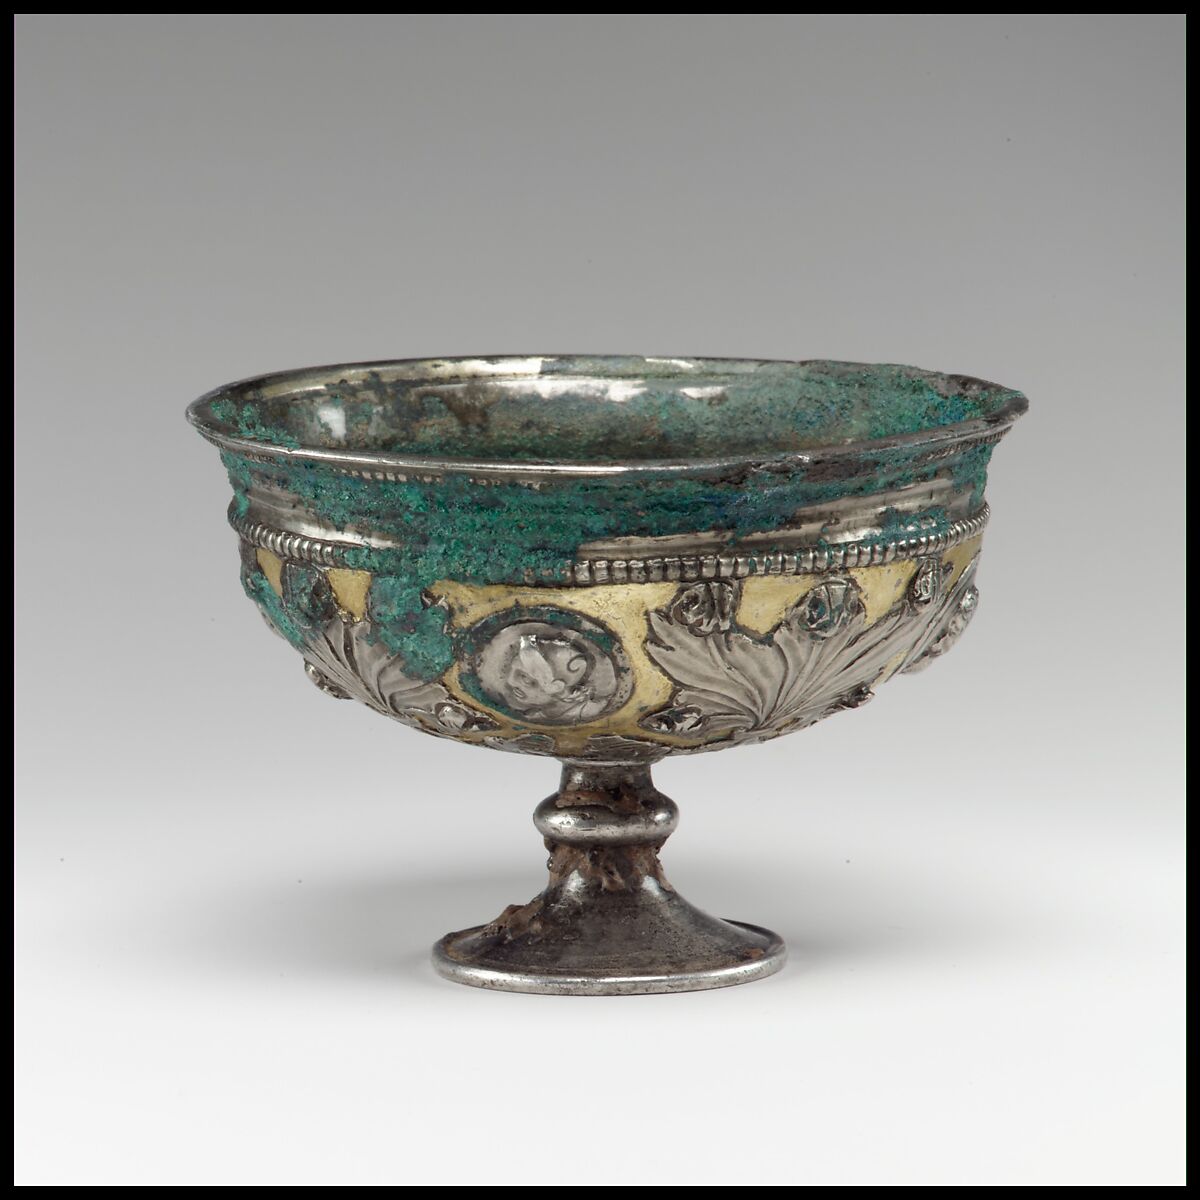 Footed cup with human busts in medallions, Silver, gilt, Kushano-Sasanian 